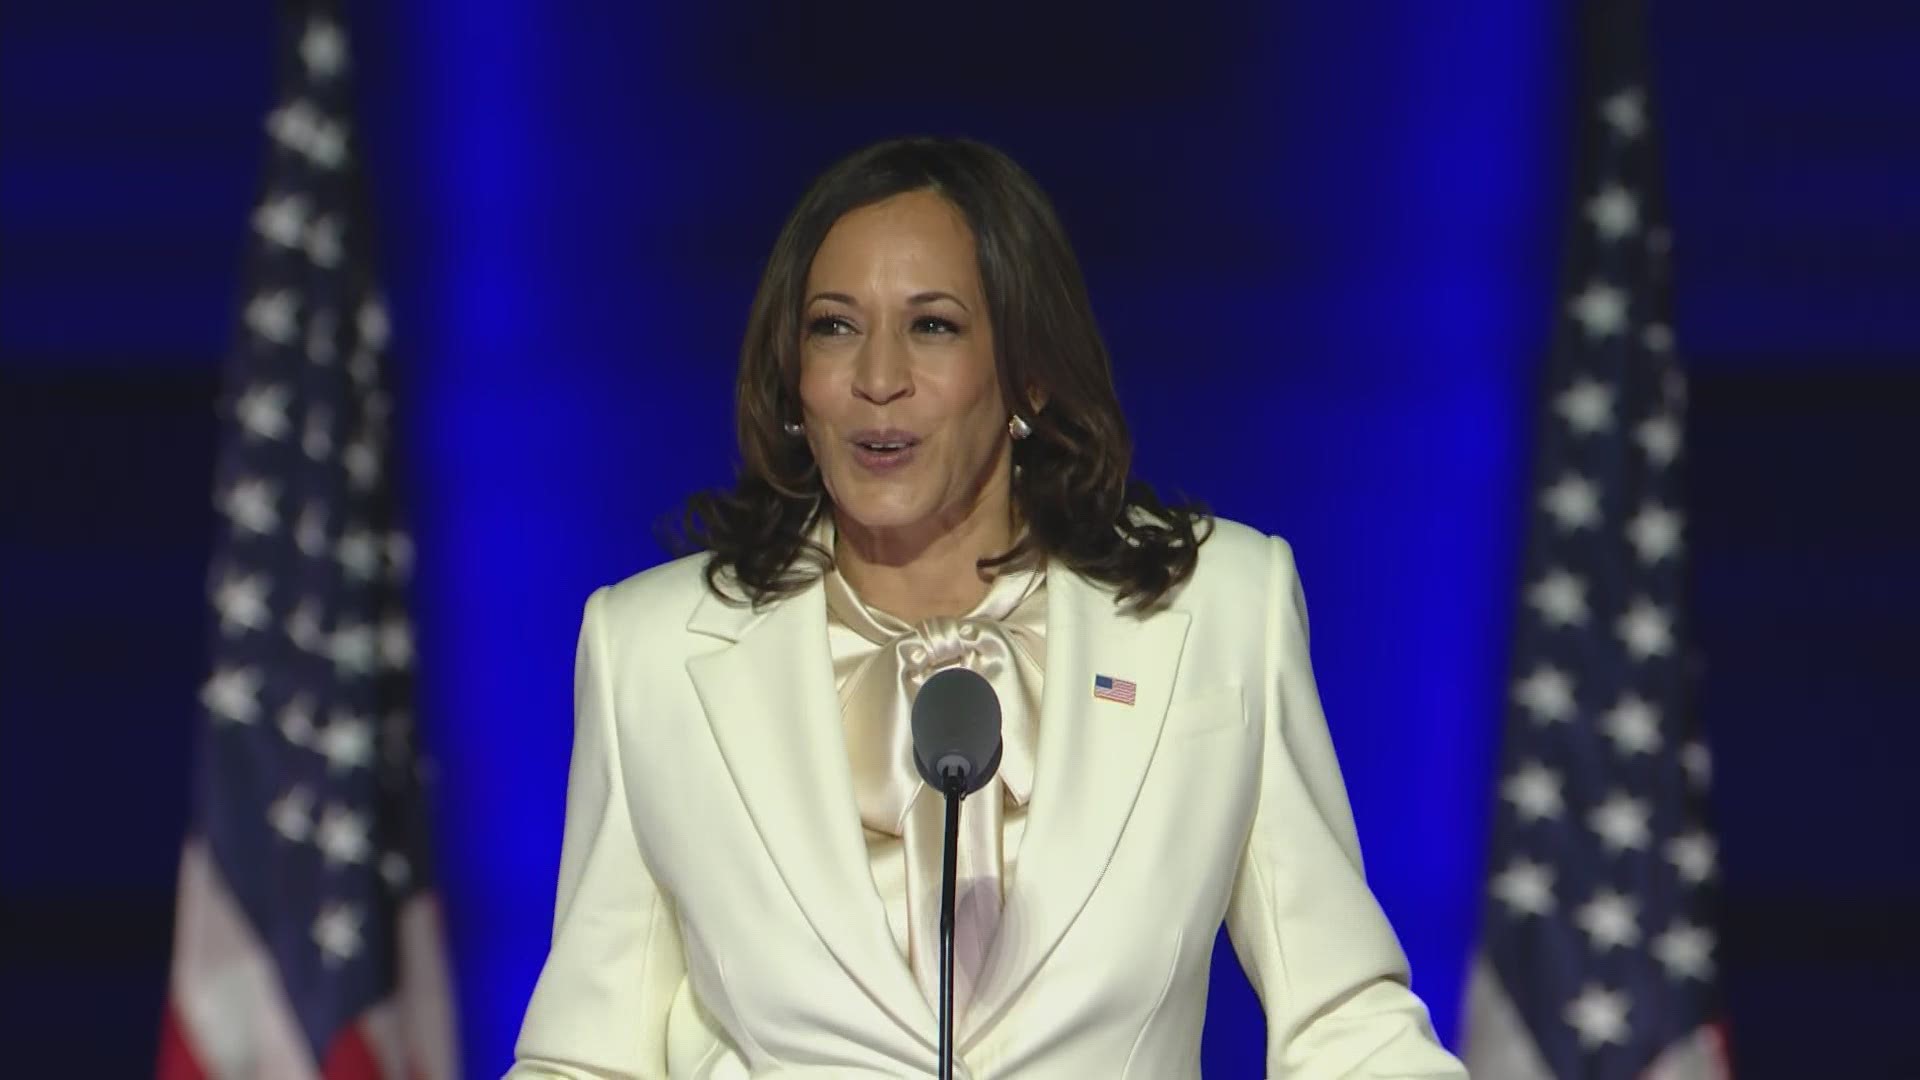 During her victory speech Saturday night, Vice President-elect Kamala Harris invoked the late John Lewis and said voters have ushered in a new day for America.